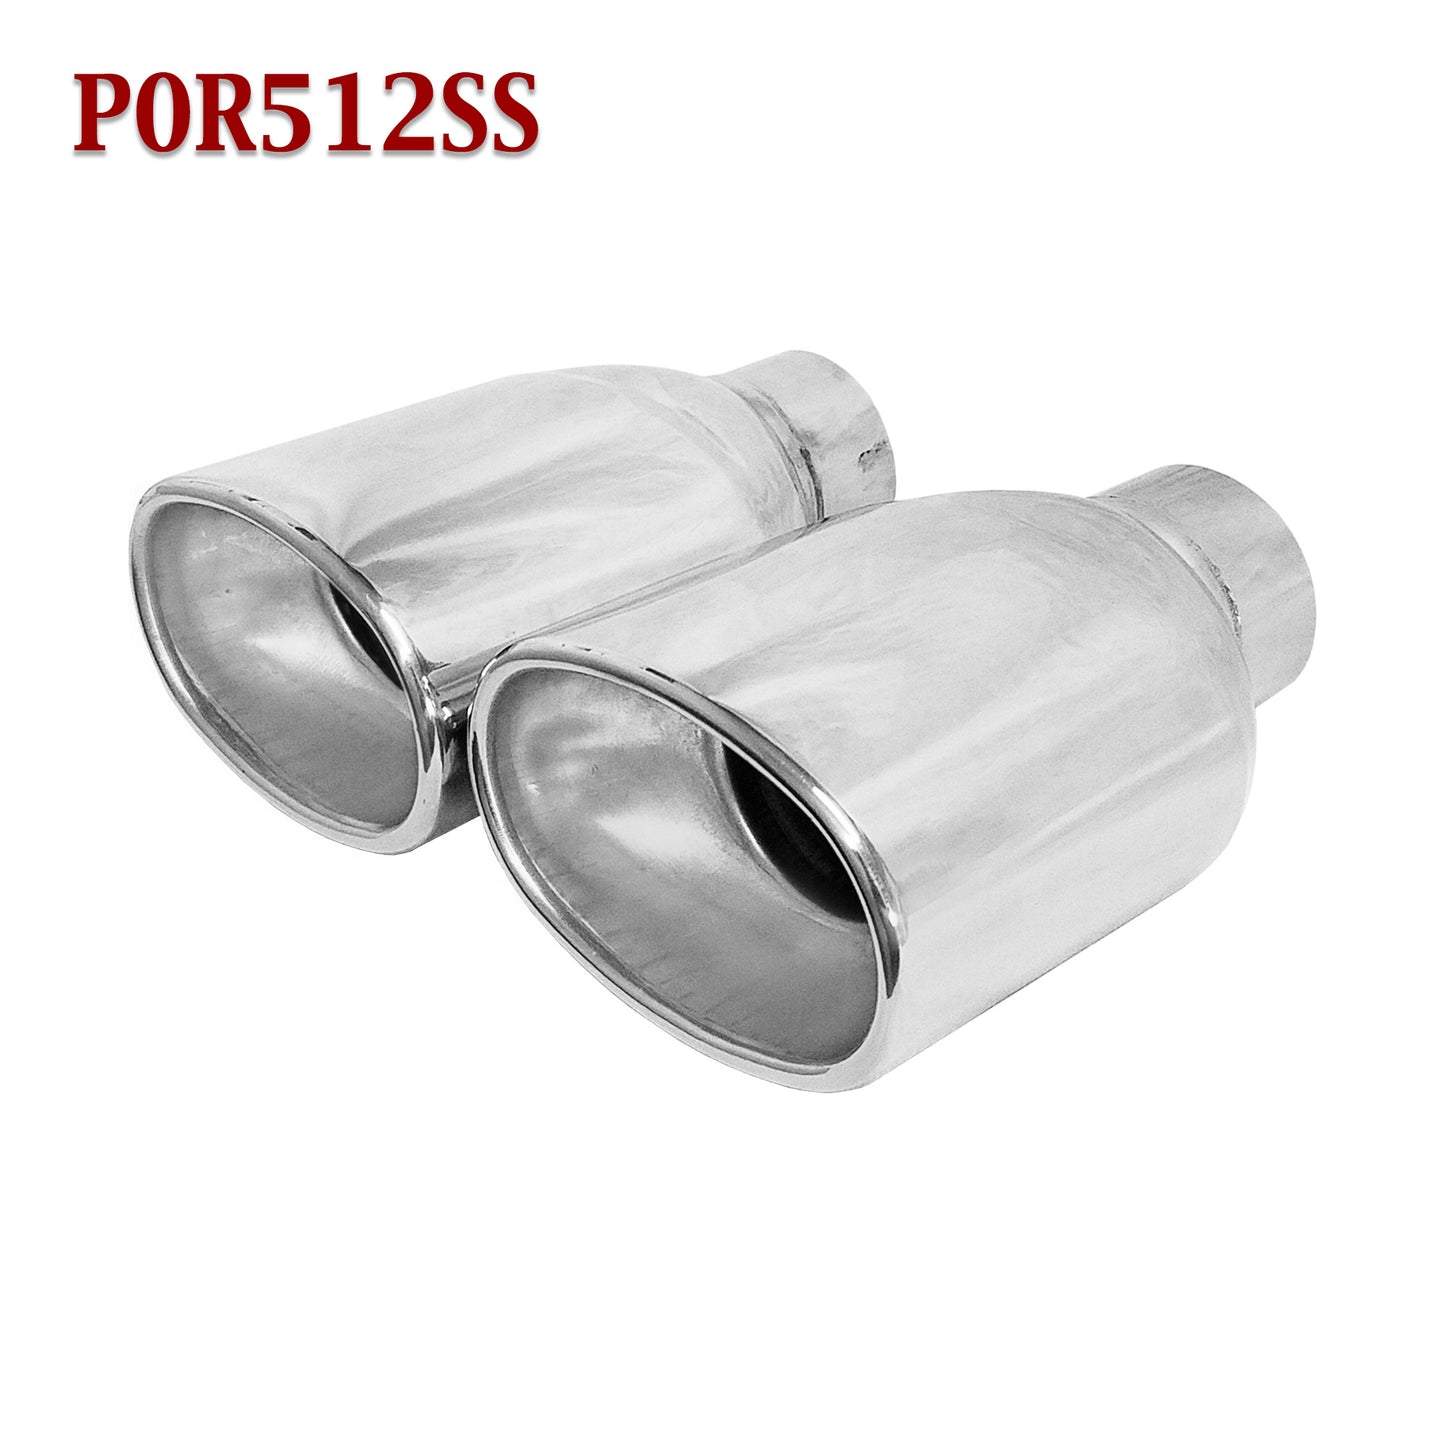 POR512SS 2.5" Stainless Oval Exhaust Tip 2 1/2" Inlet / 5 1/4" Outlet / 5" Long